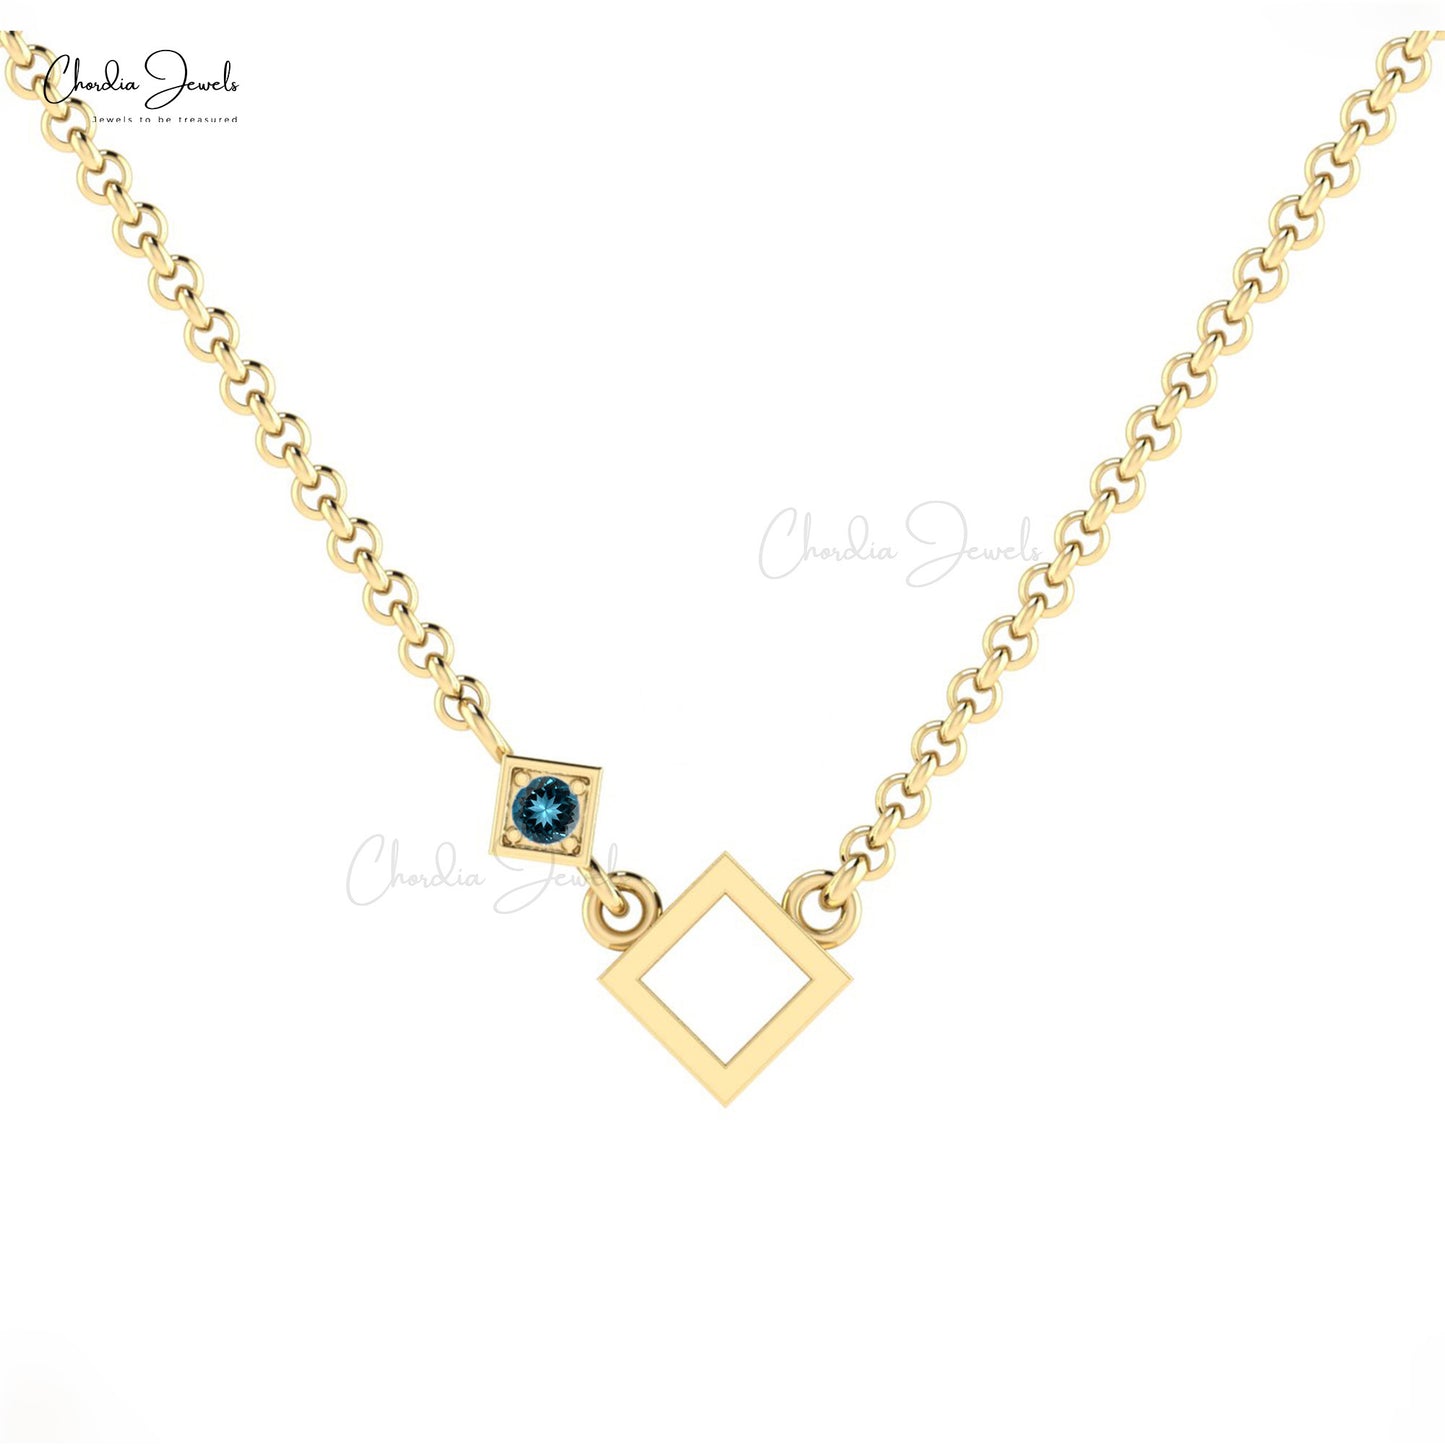 Trendy Exclusive Charms Necklace Pendant For Women Natural London Blue Topaz Open Square Gemstone Necklace in 14k Solid Gold Wedding Gift